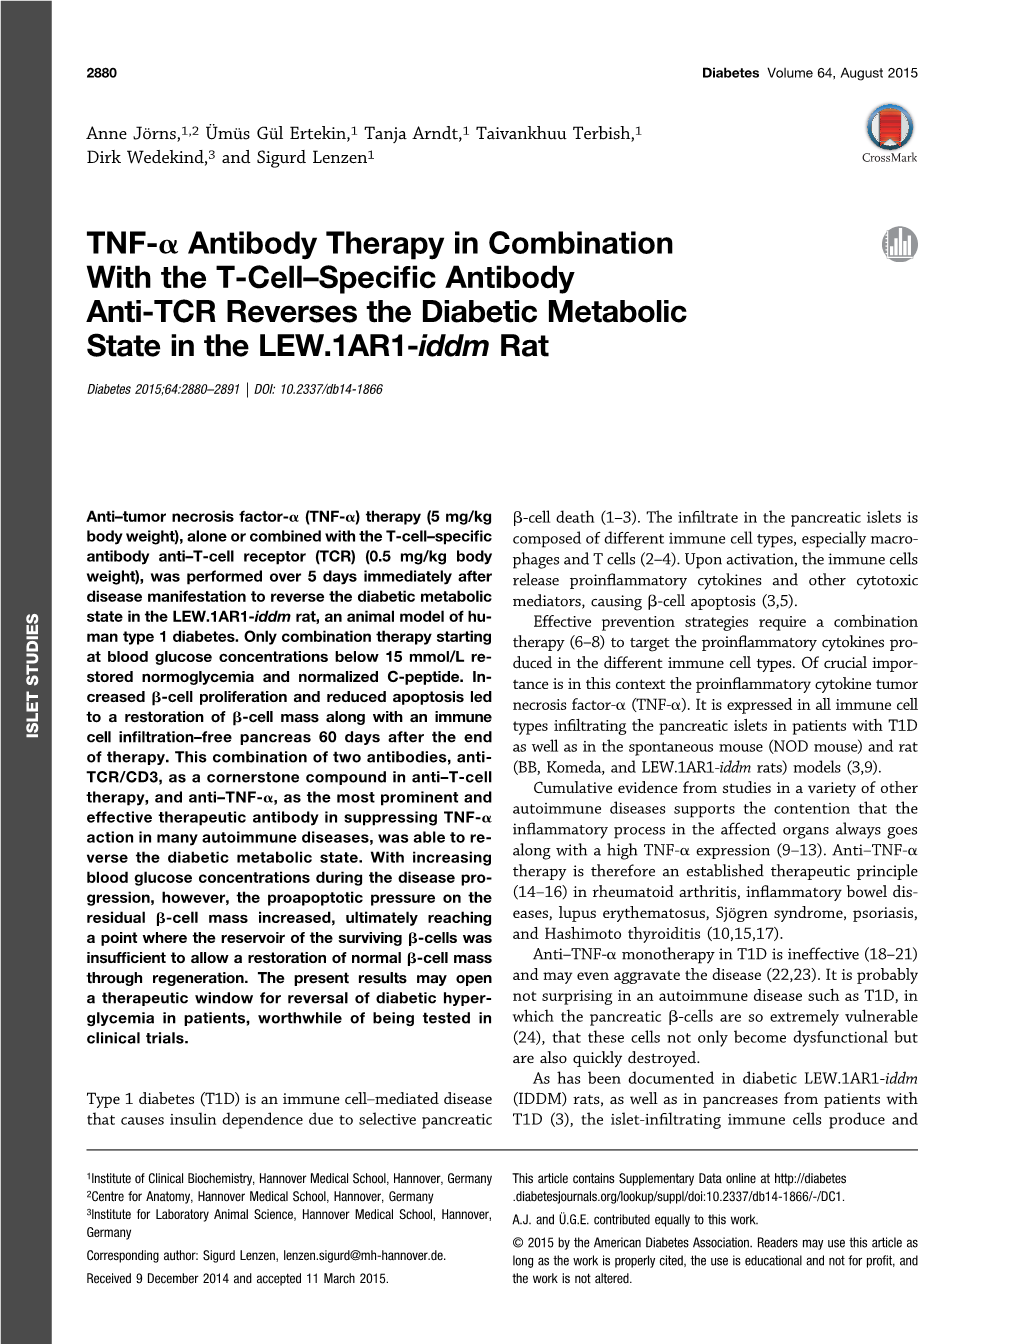 TNF-A Antibody Therapy in Combination with the T-Cell–Speciﬁc Antibody Anti-TCR Reverses the Diabetic Metabolic State in the LEW.1AR1-Iddm Rat